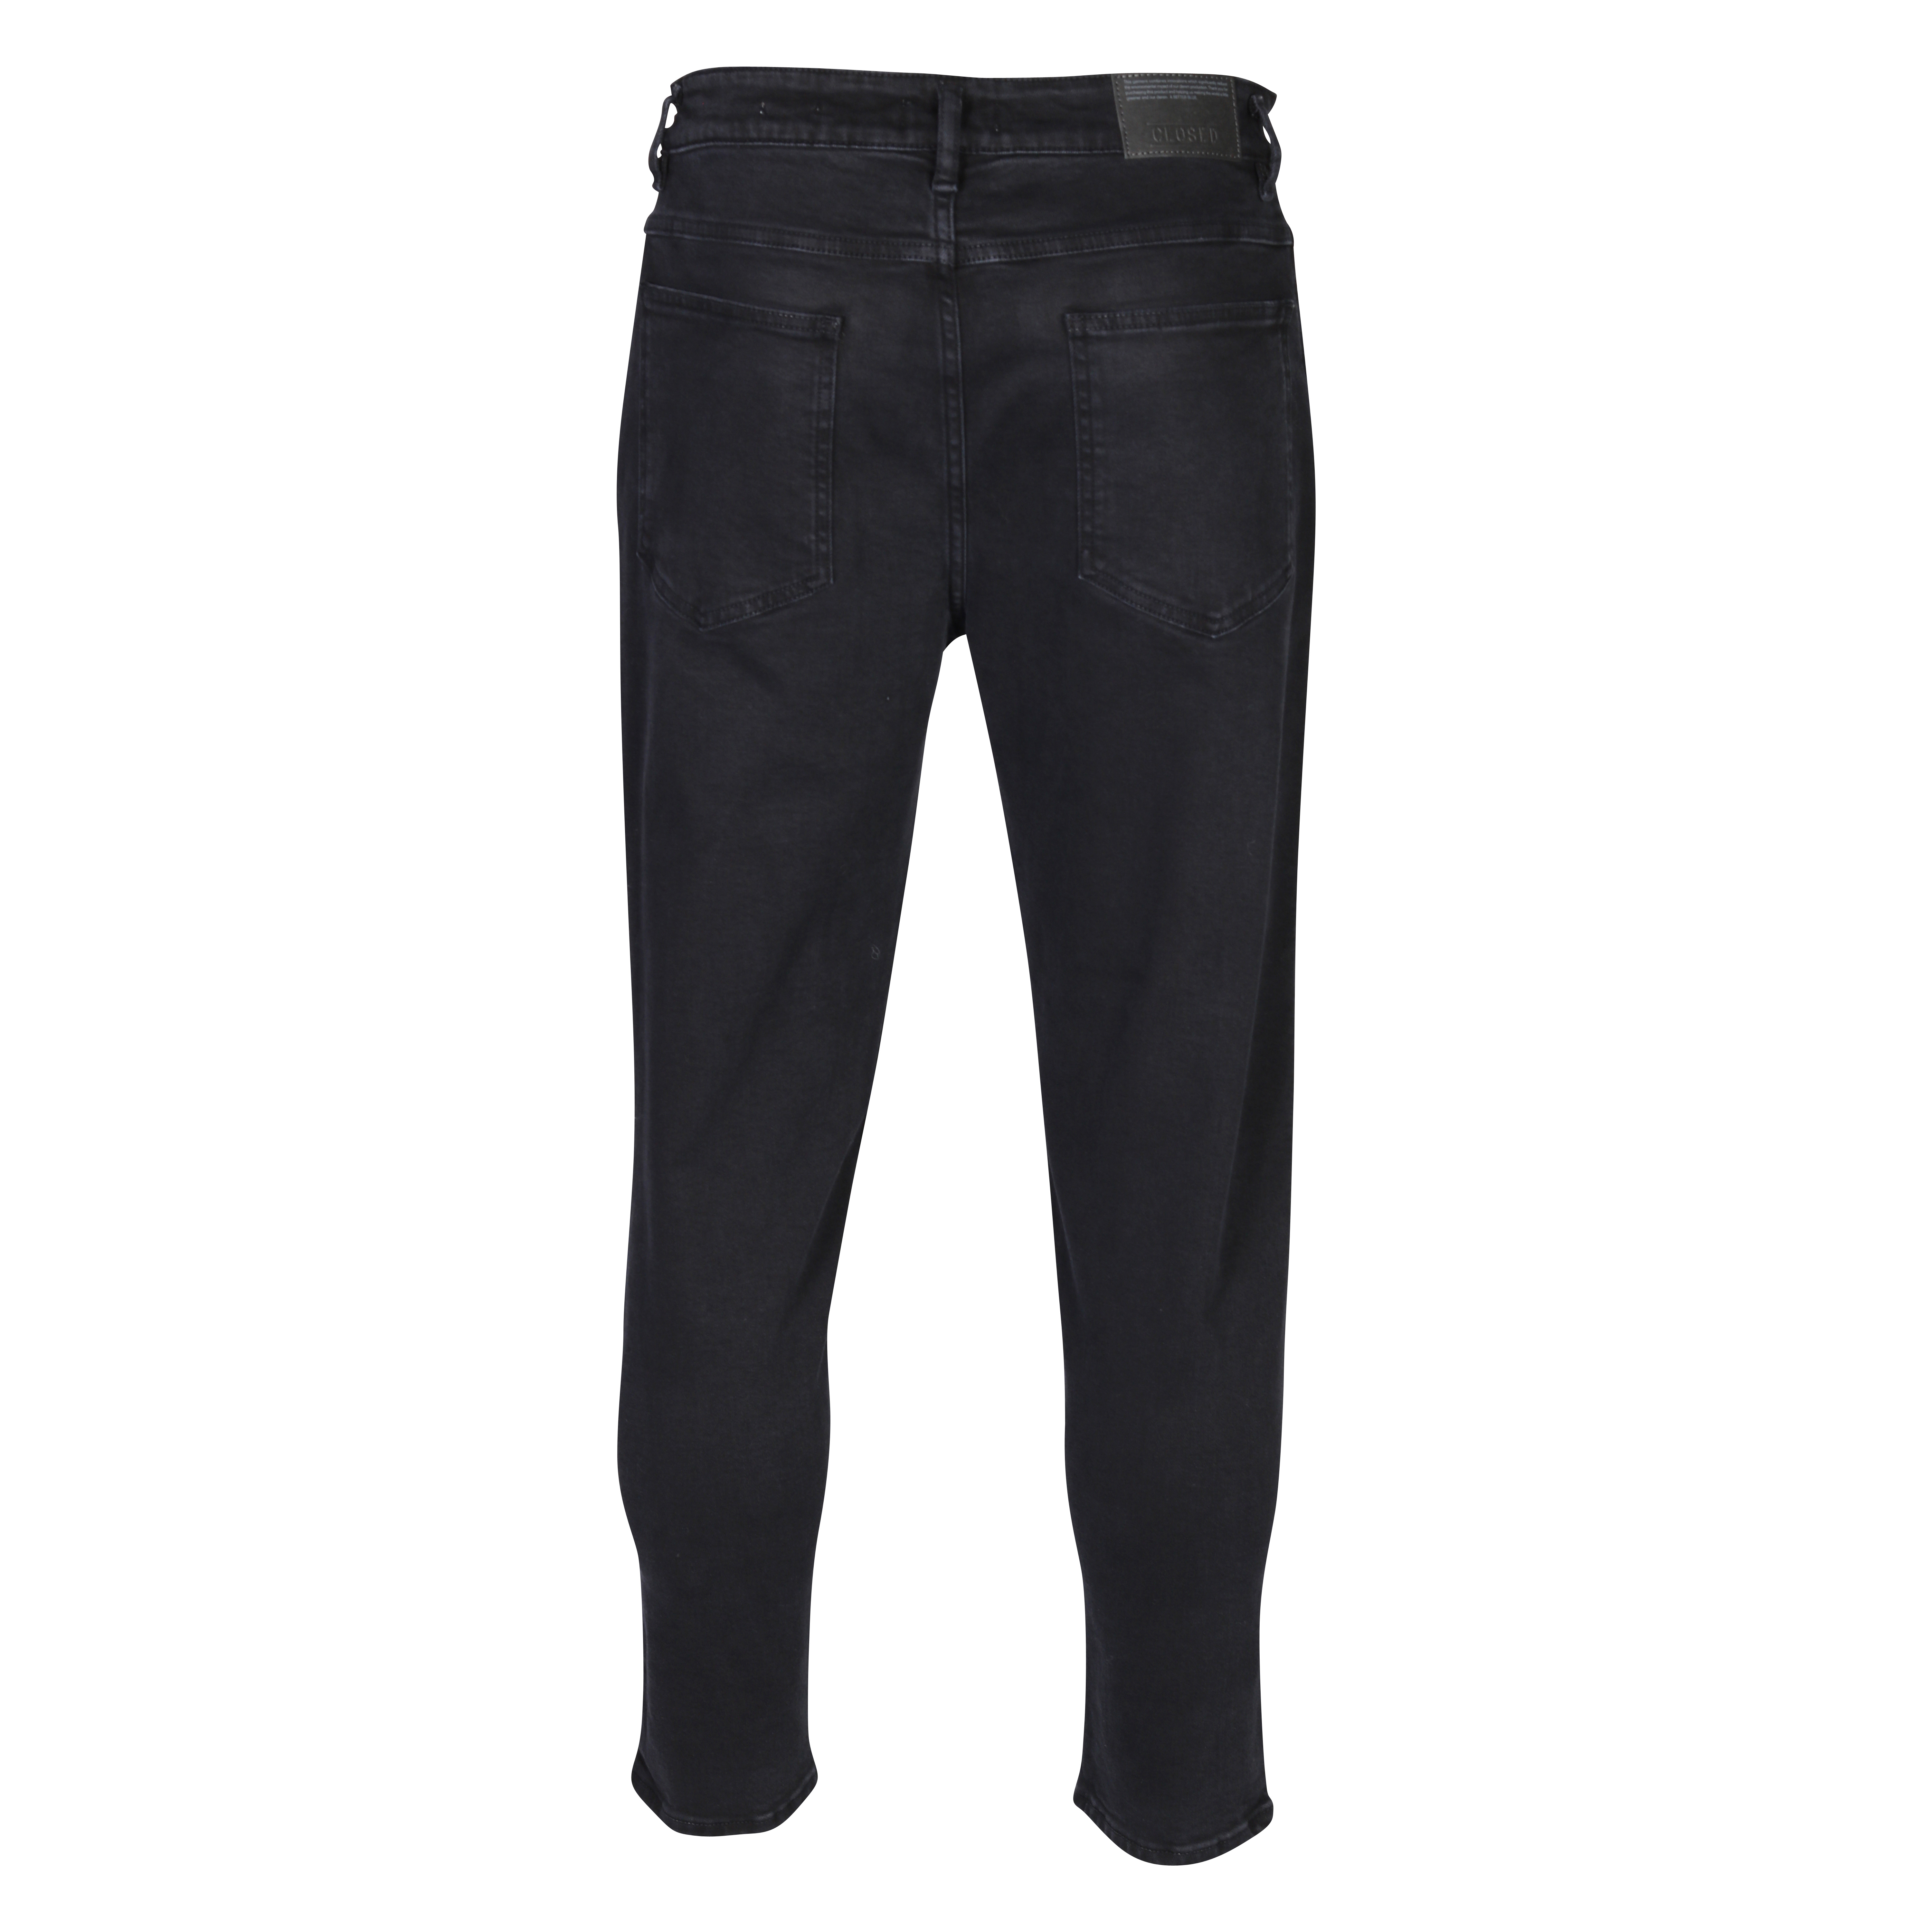 CLOSED X-Lent Tapered Jeans in Black 36